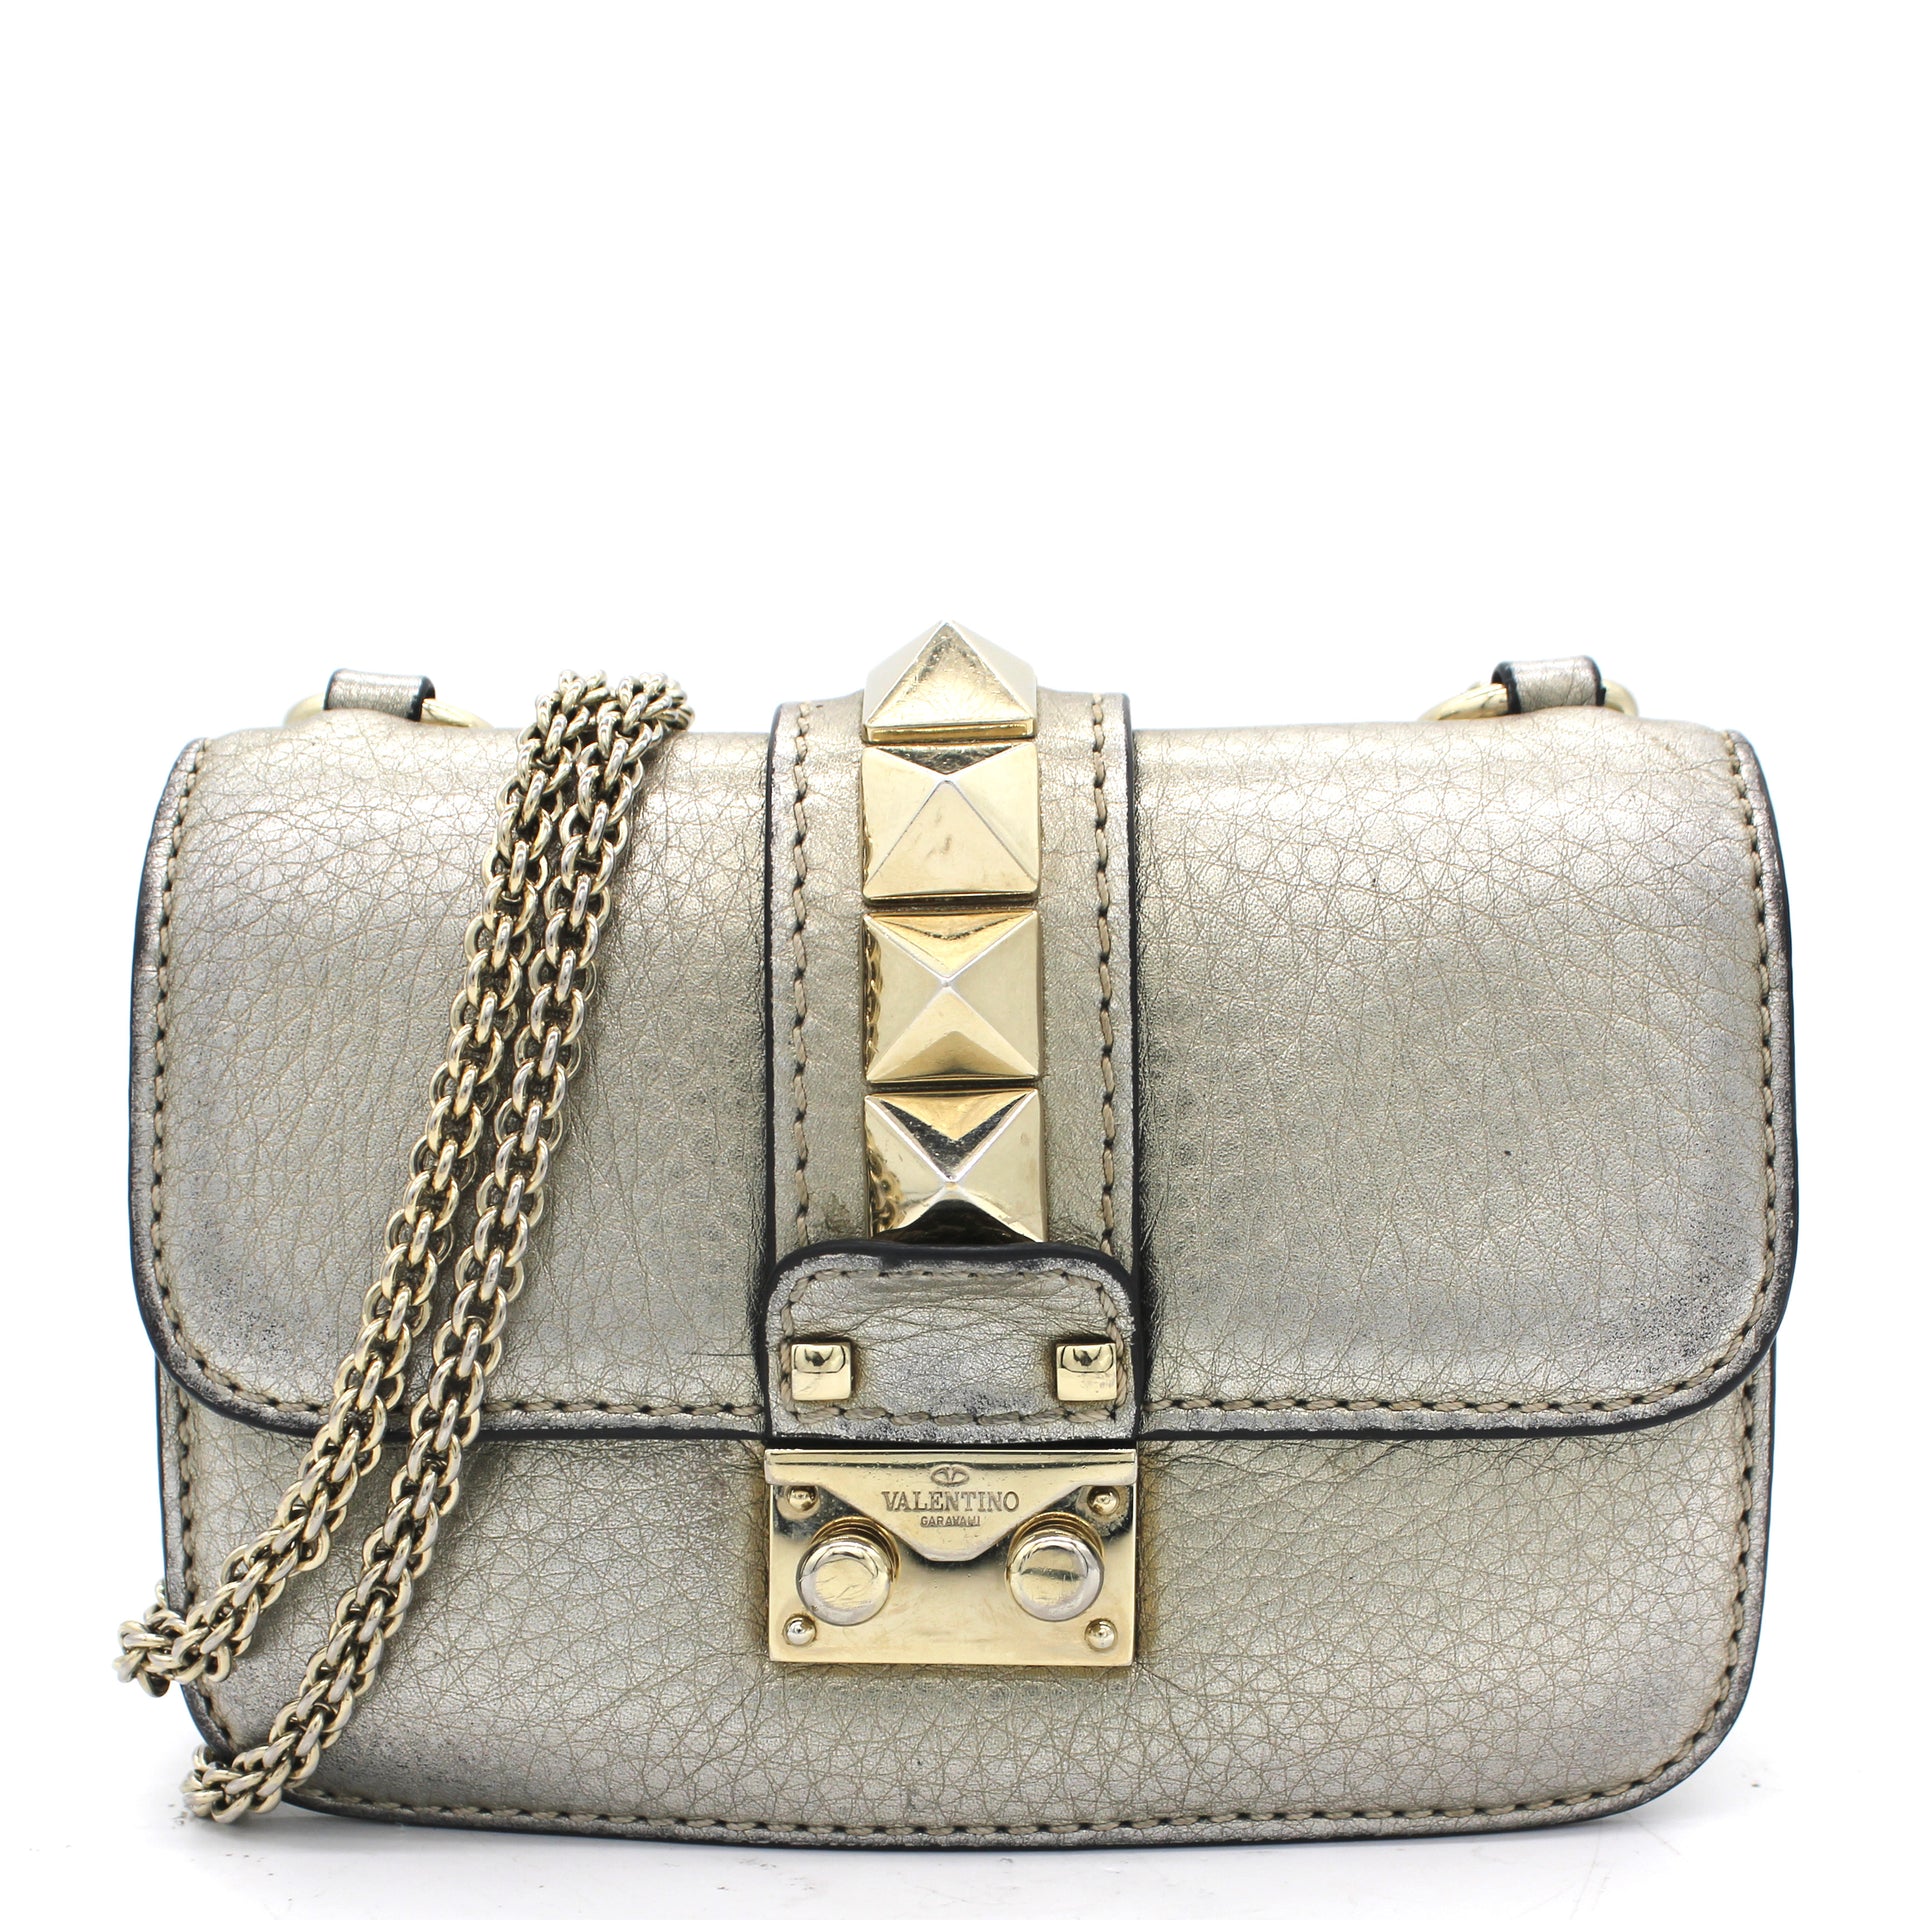 Champagne Gold Leather Rockstud Glam Lock Small Flap Bag